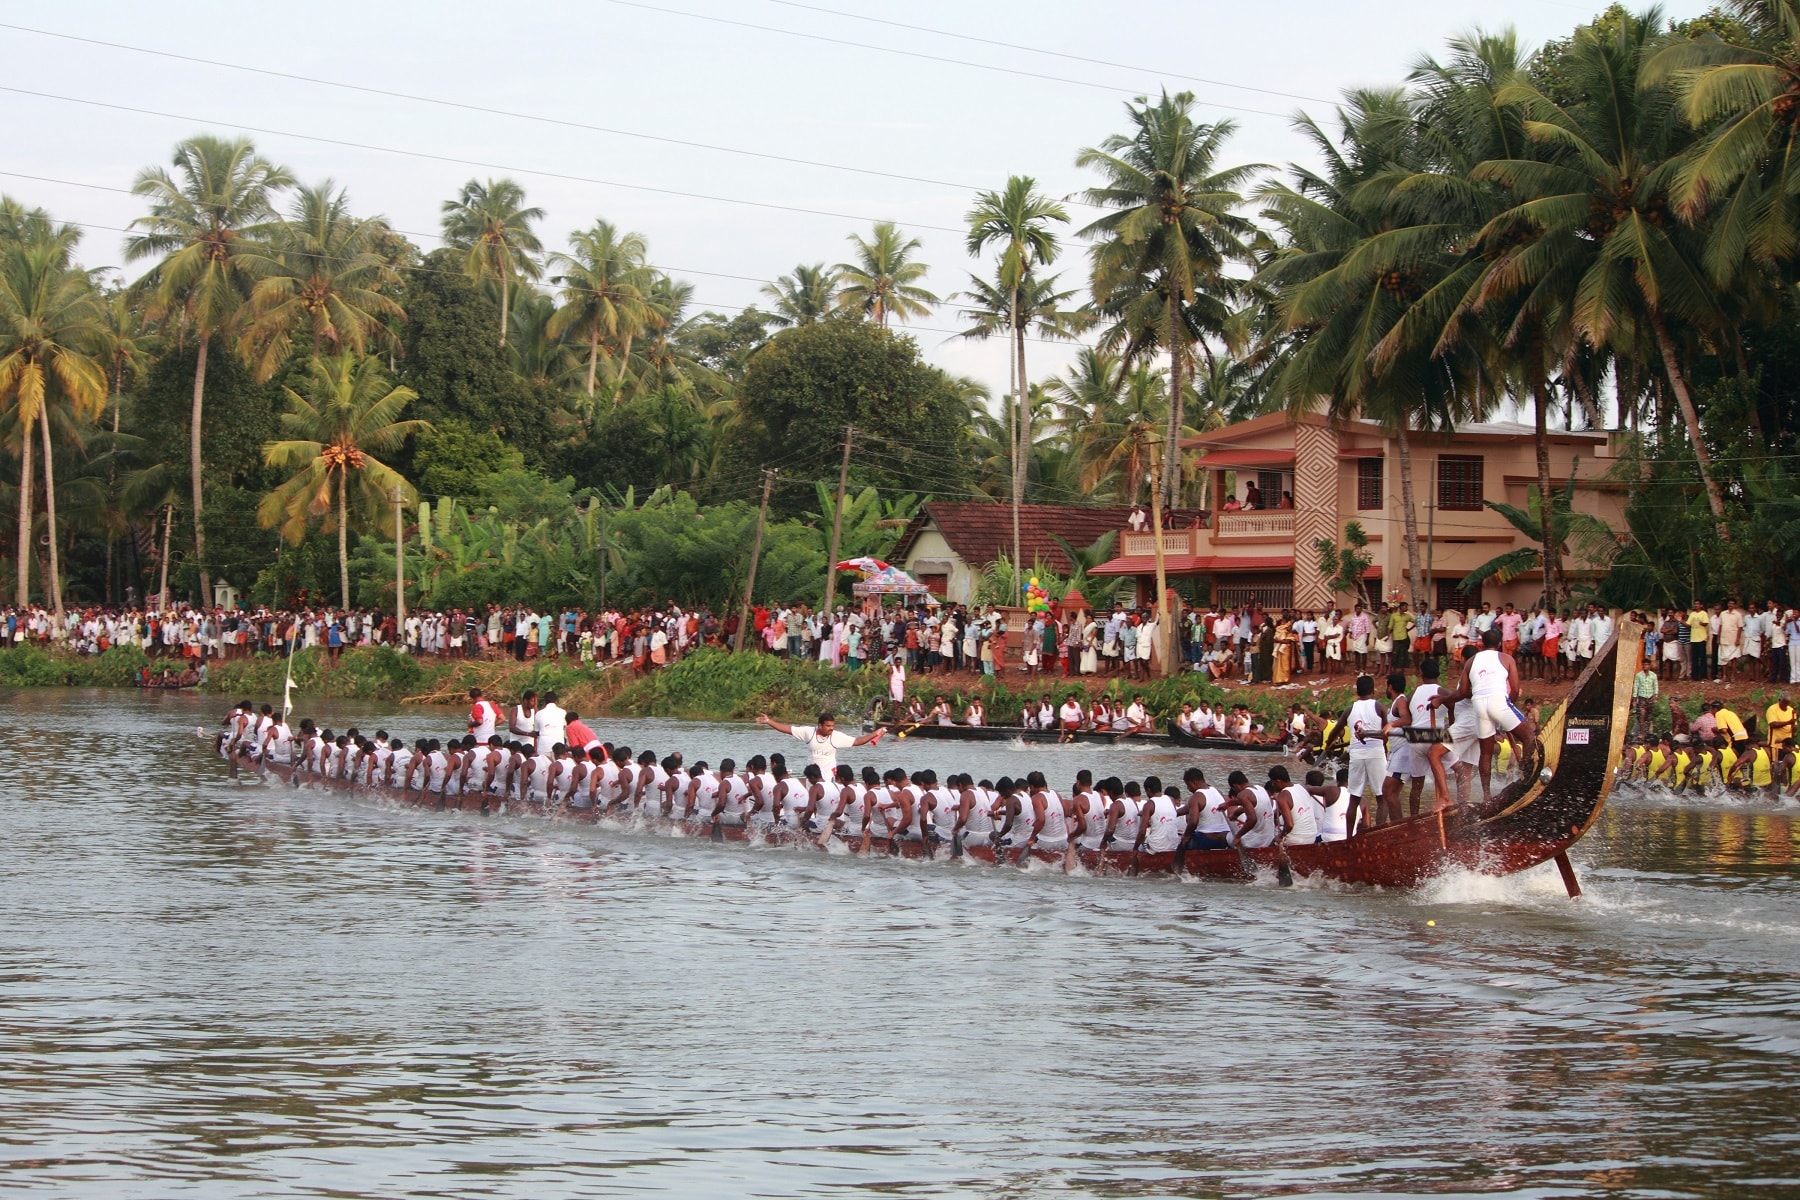 People cheer the boats from the riverbanks